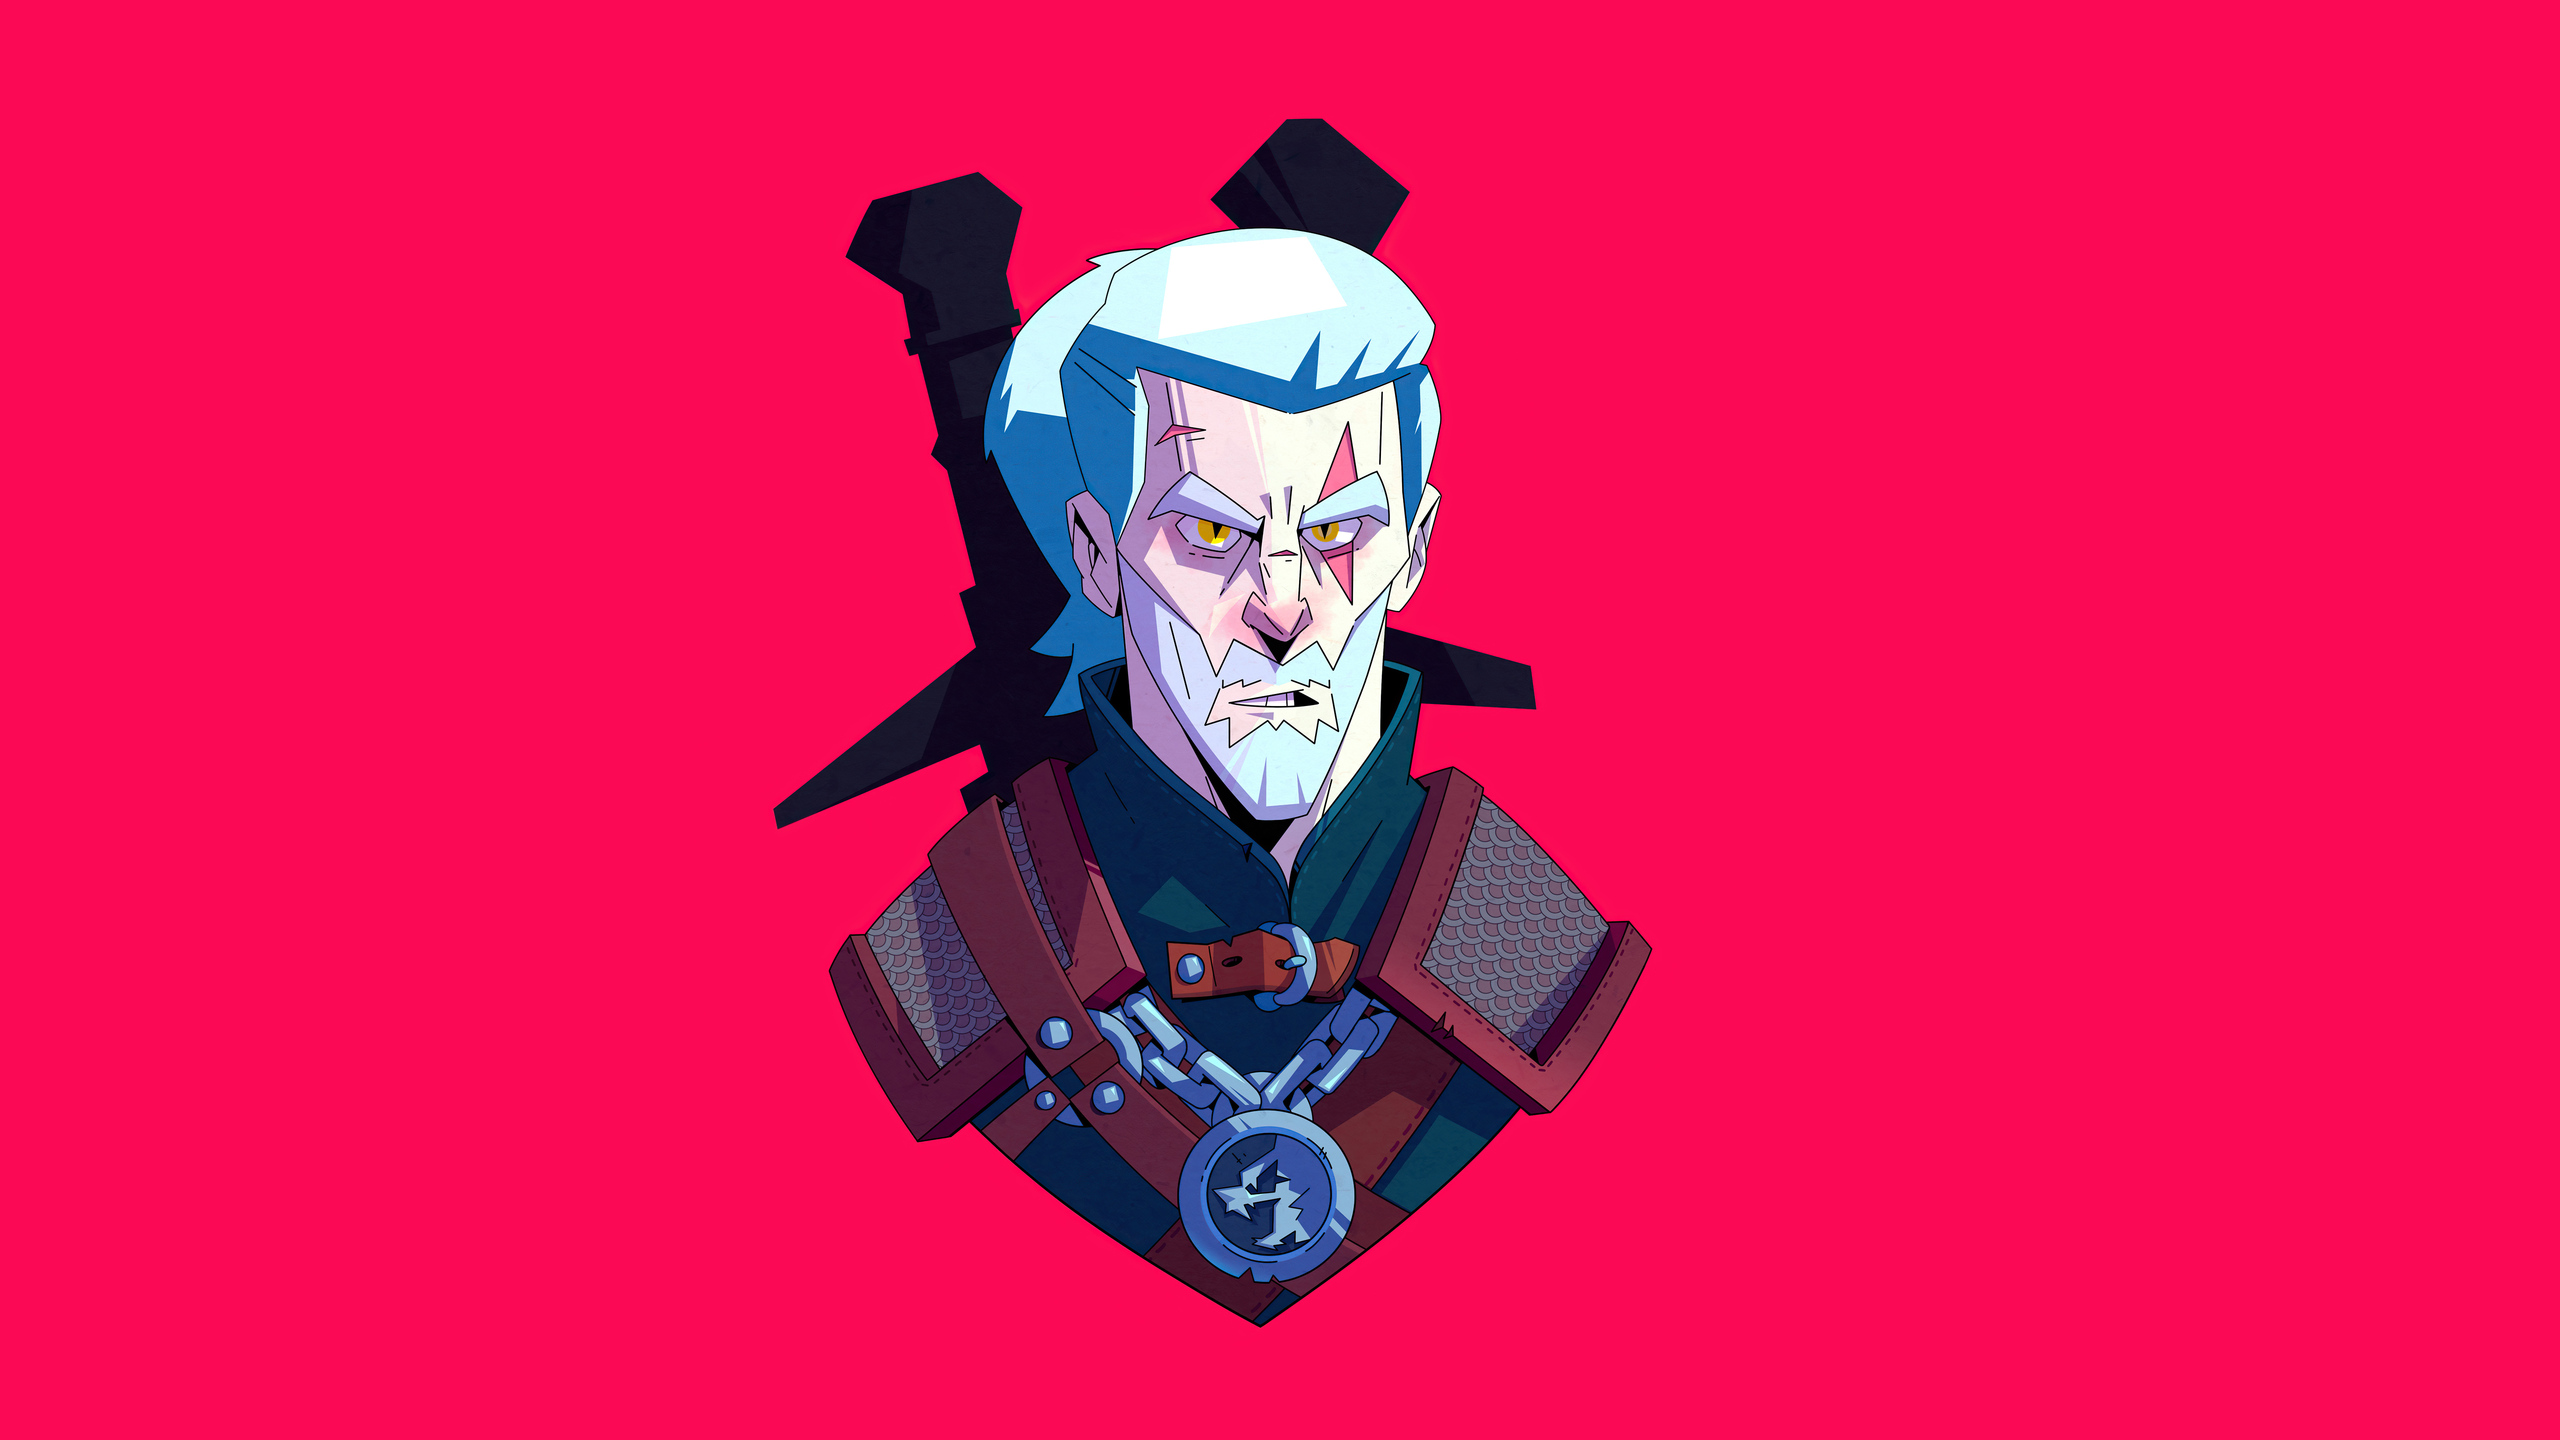 geralt-of-rivia-from-the-witcher-series-minimal-5k-7w.jpg